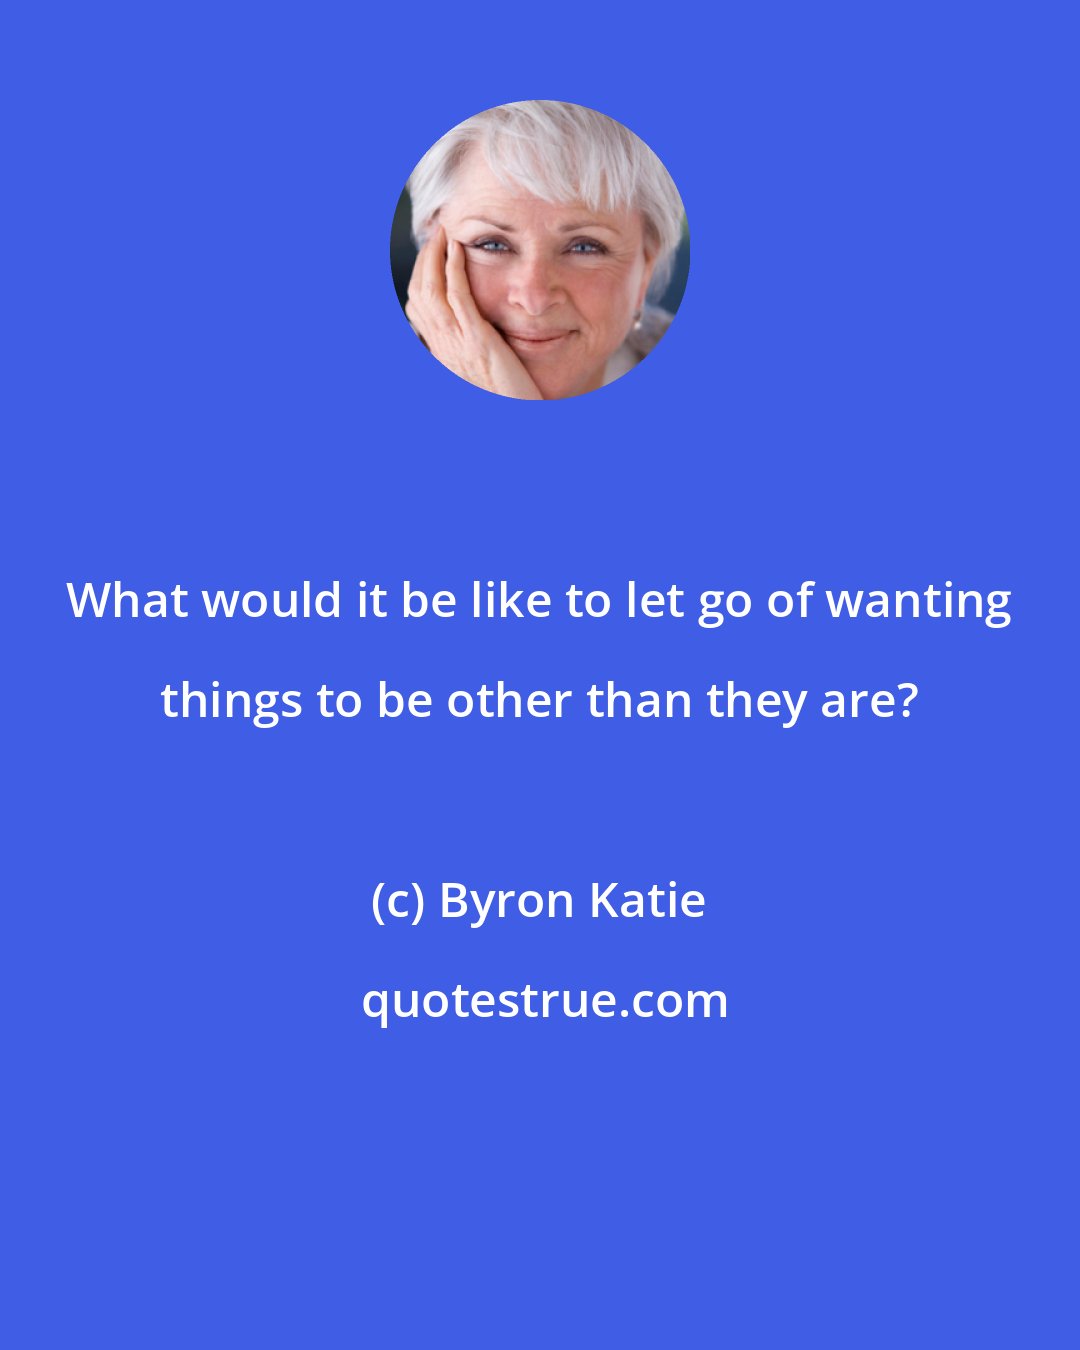 Byron Katie: What would it be like to let go of wanting things to be other than they are?